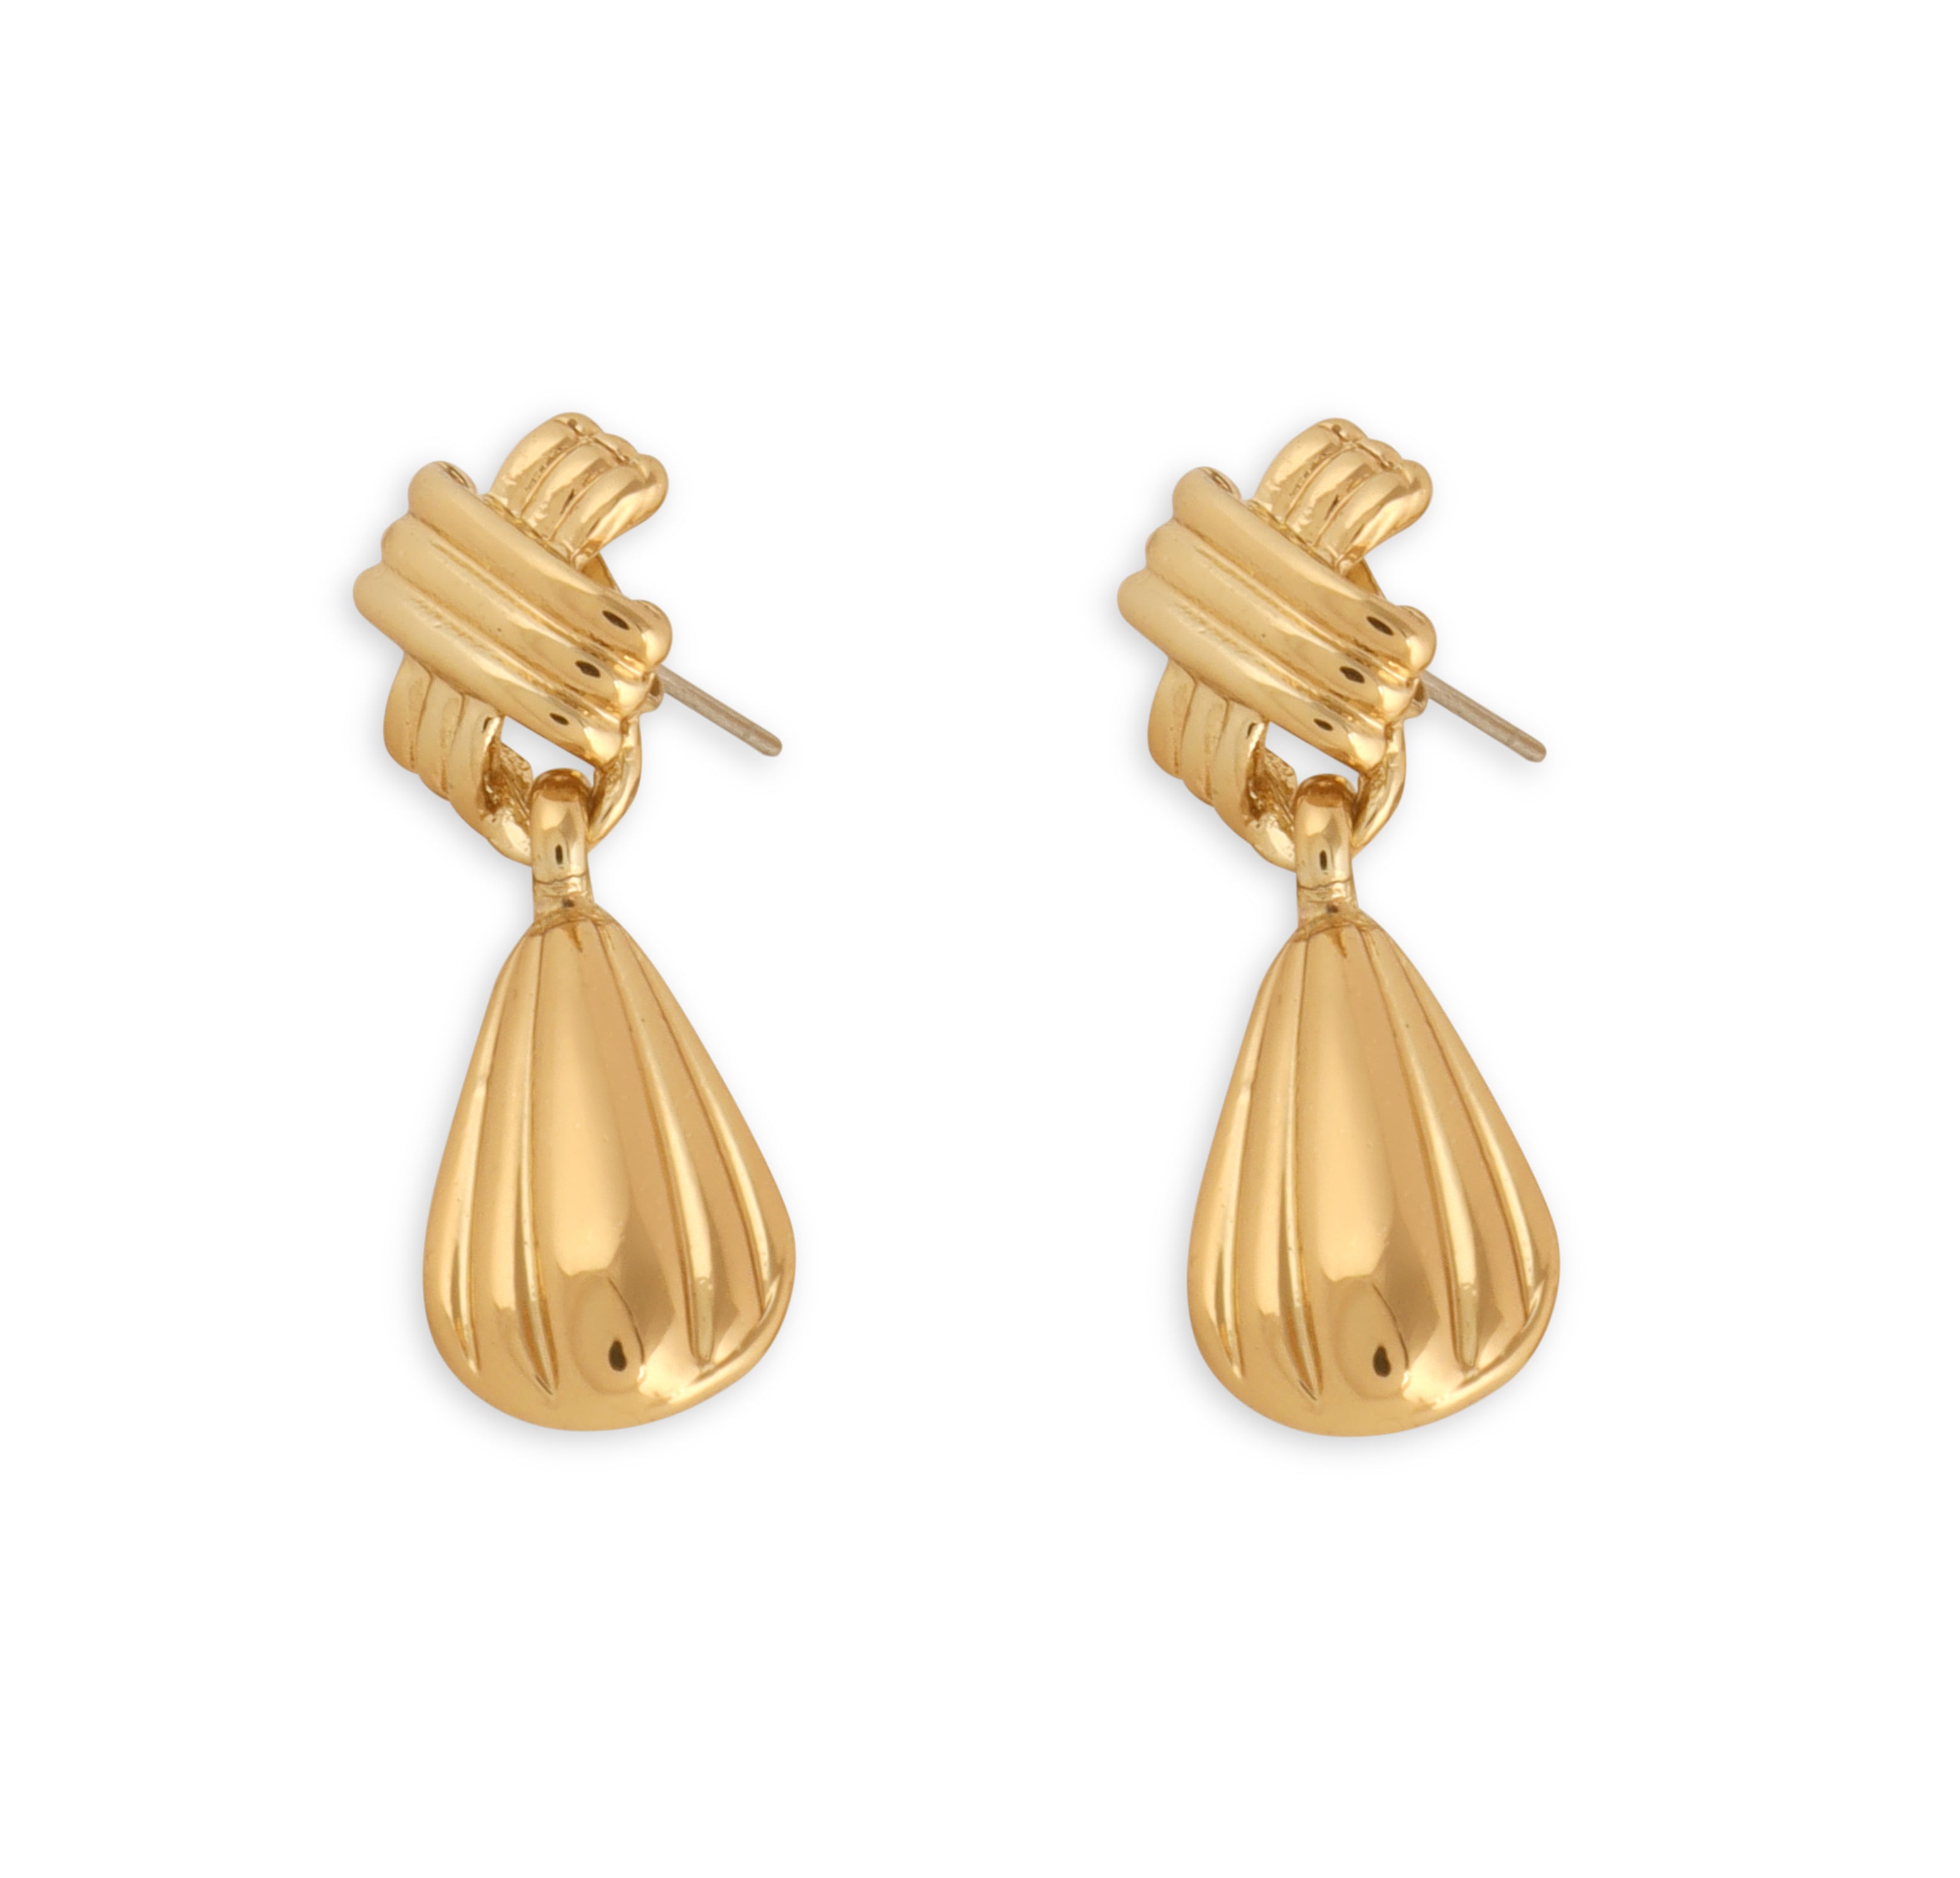 TFC  Spitfire Small Gold Plated Earrings-Discover daily wear gold earrings including stud earrings, hoop earrings, and pearl earrings, perfect as earrings for women and earrings for girls.Find the cheapest fashion jewellery which is anti-tarnis​h only at The Fun company